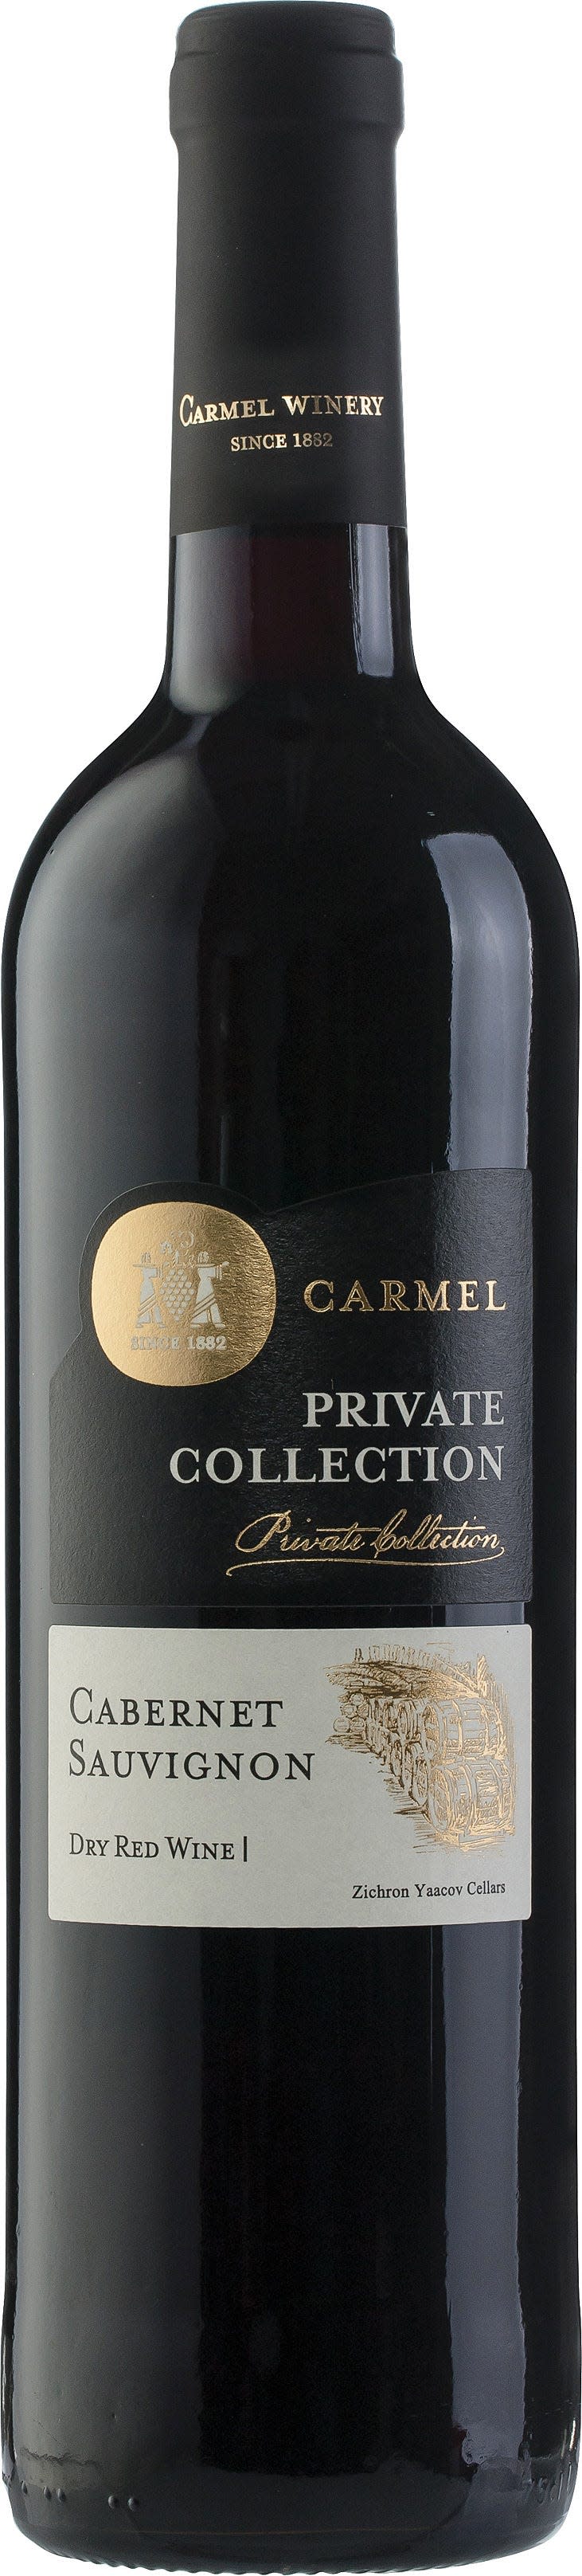 Carmel Private Collection Cabernet Sauvignon is 'rich yet food friendly,' says Gabriel Geller of Royal Wine.